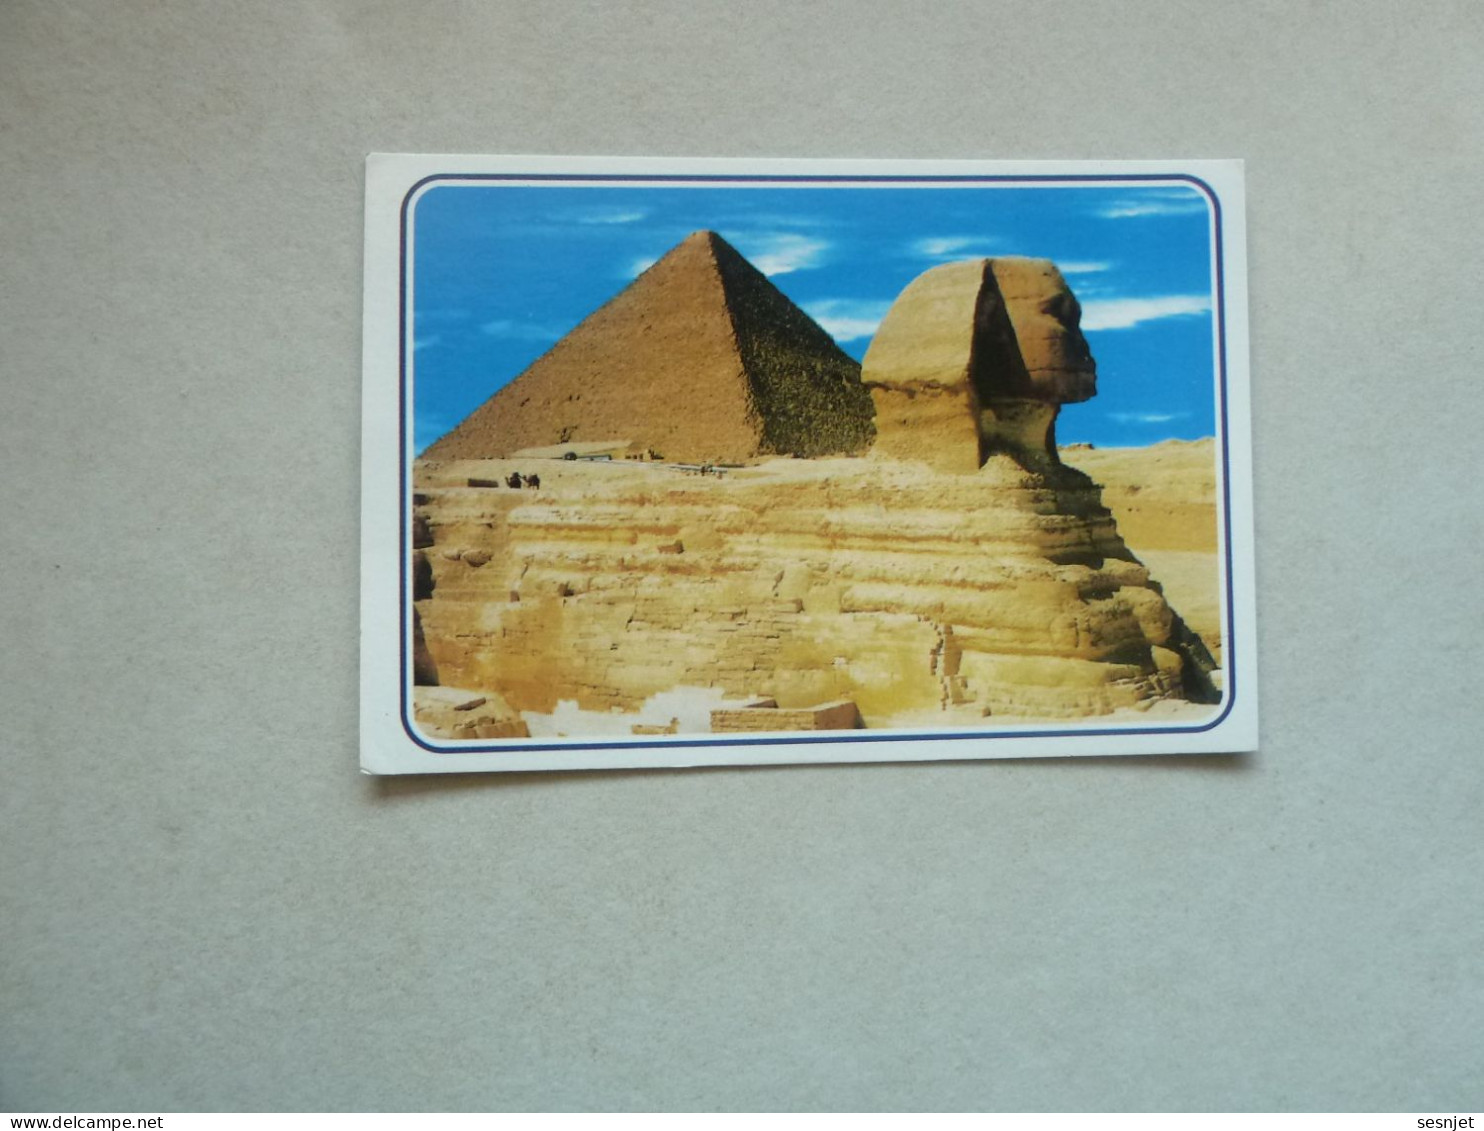 Egypte - Giza - The Great Sphinx And Keops Pyramids - 99 - Editions Al Sayad Printing - Année 2000 - - Pyramides